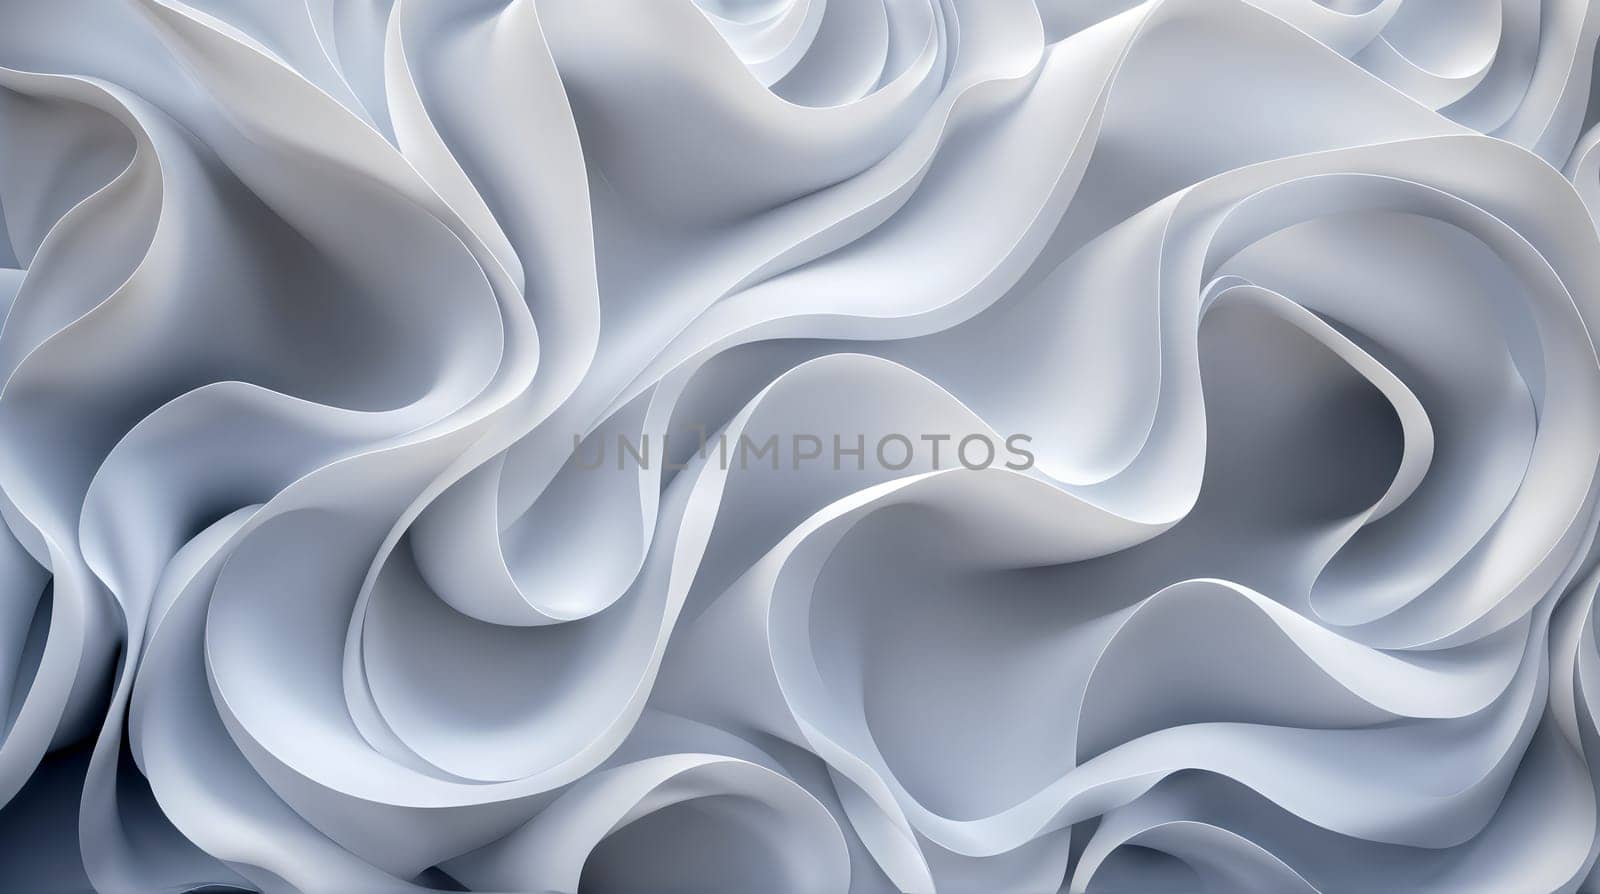 graceful flow and delicate folds of a white flowing shape, presenting a serene and abstract geometry suggestive of softness and elegance